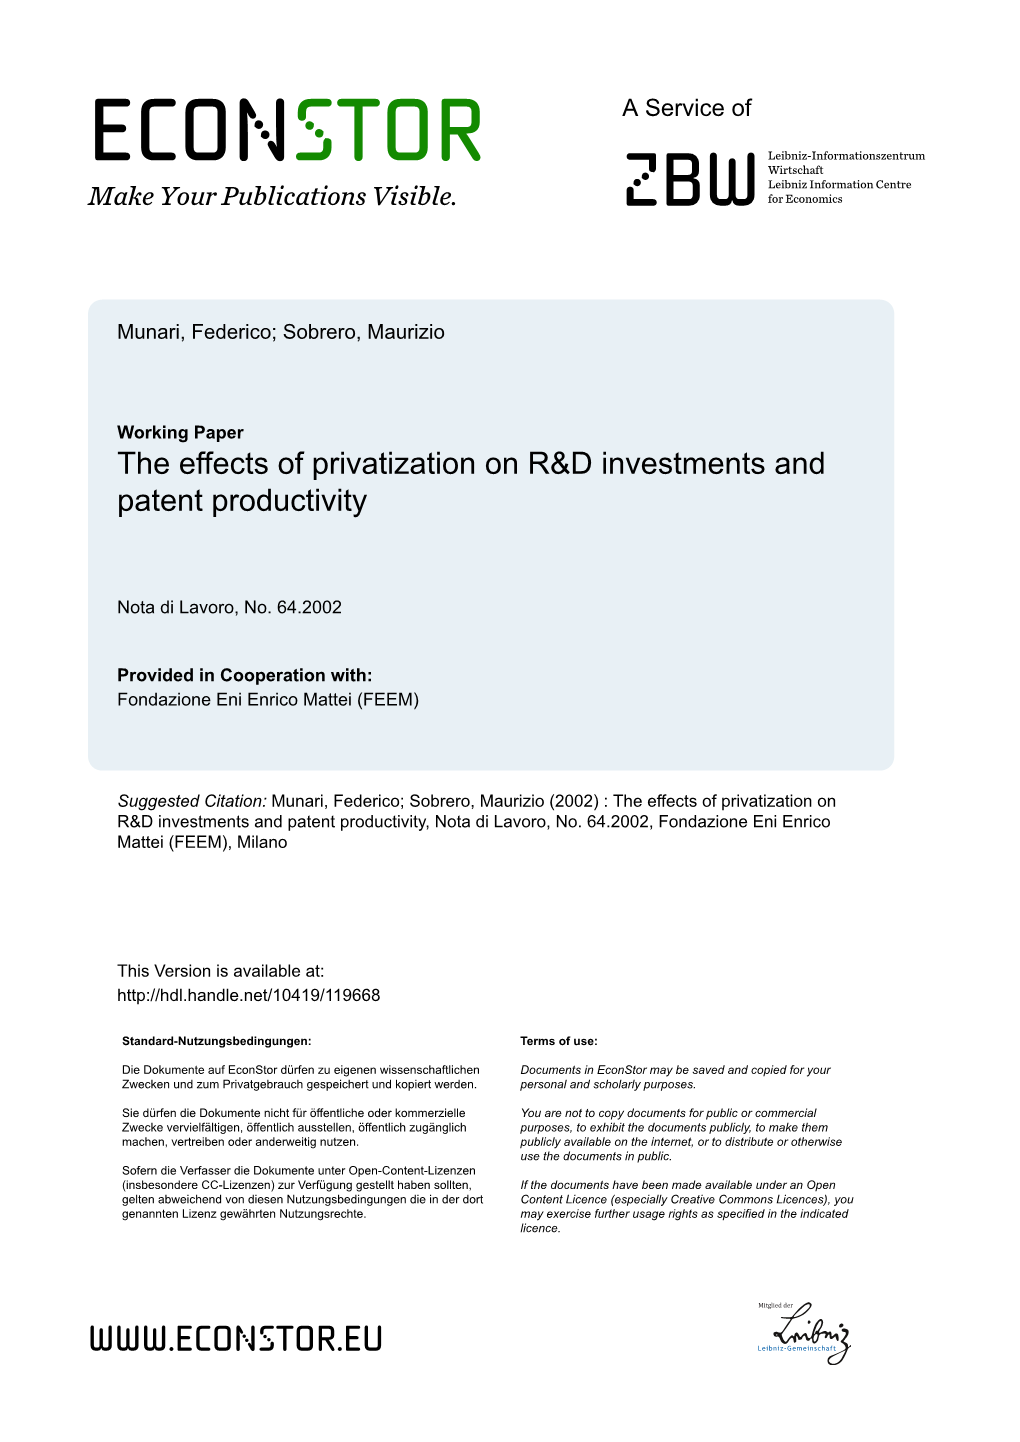 The Effects of Privatization on R&D Investments and Patent Productivity